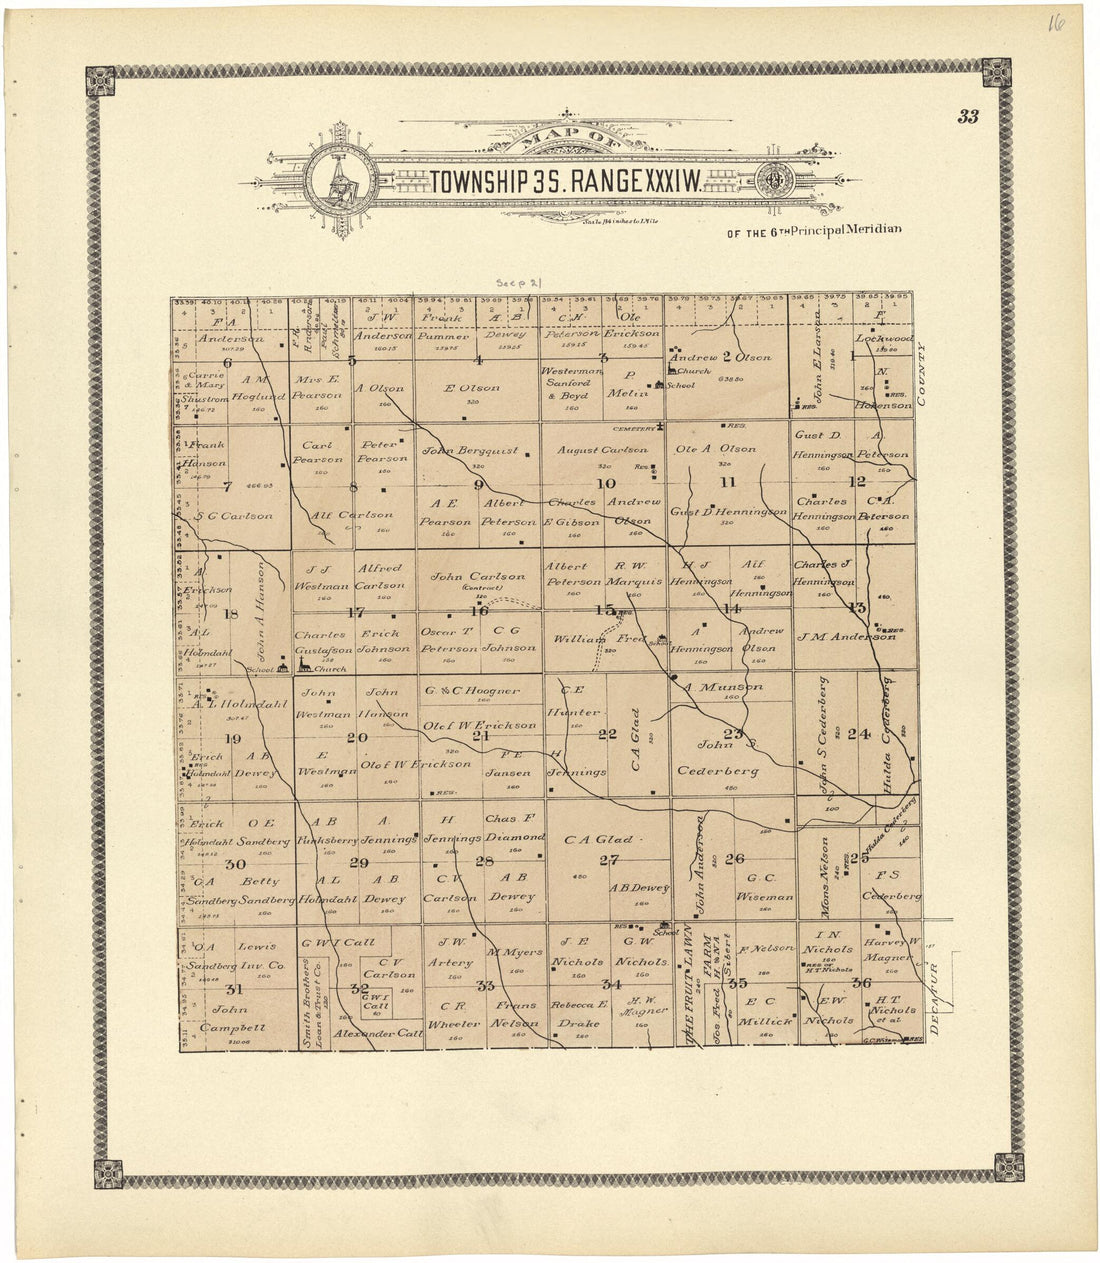 This old map of Map of Township 3 S. Range XXXI W. from Standard Atlas of Rawlins County, Kansas from 1906 was created by  Geo. A. Ogle &amp; Co in 1906